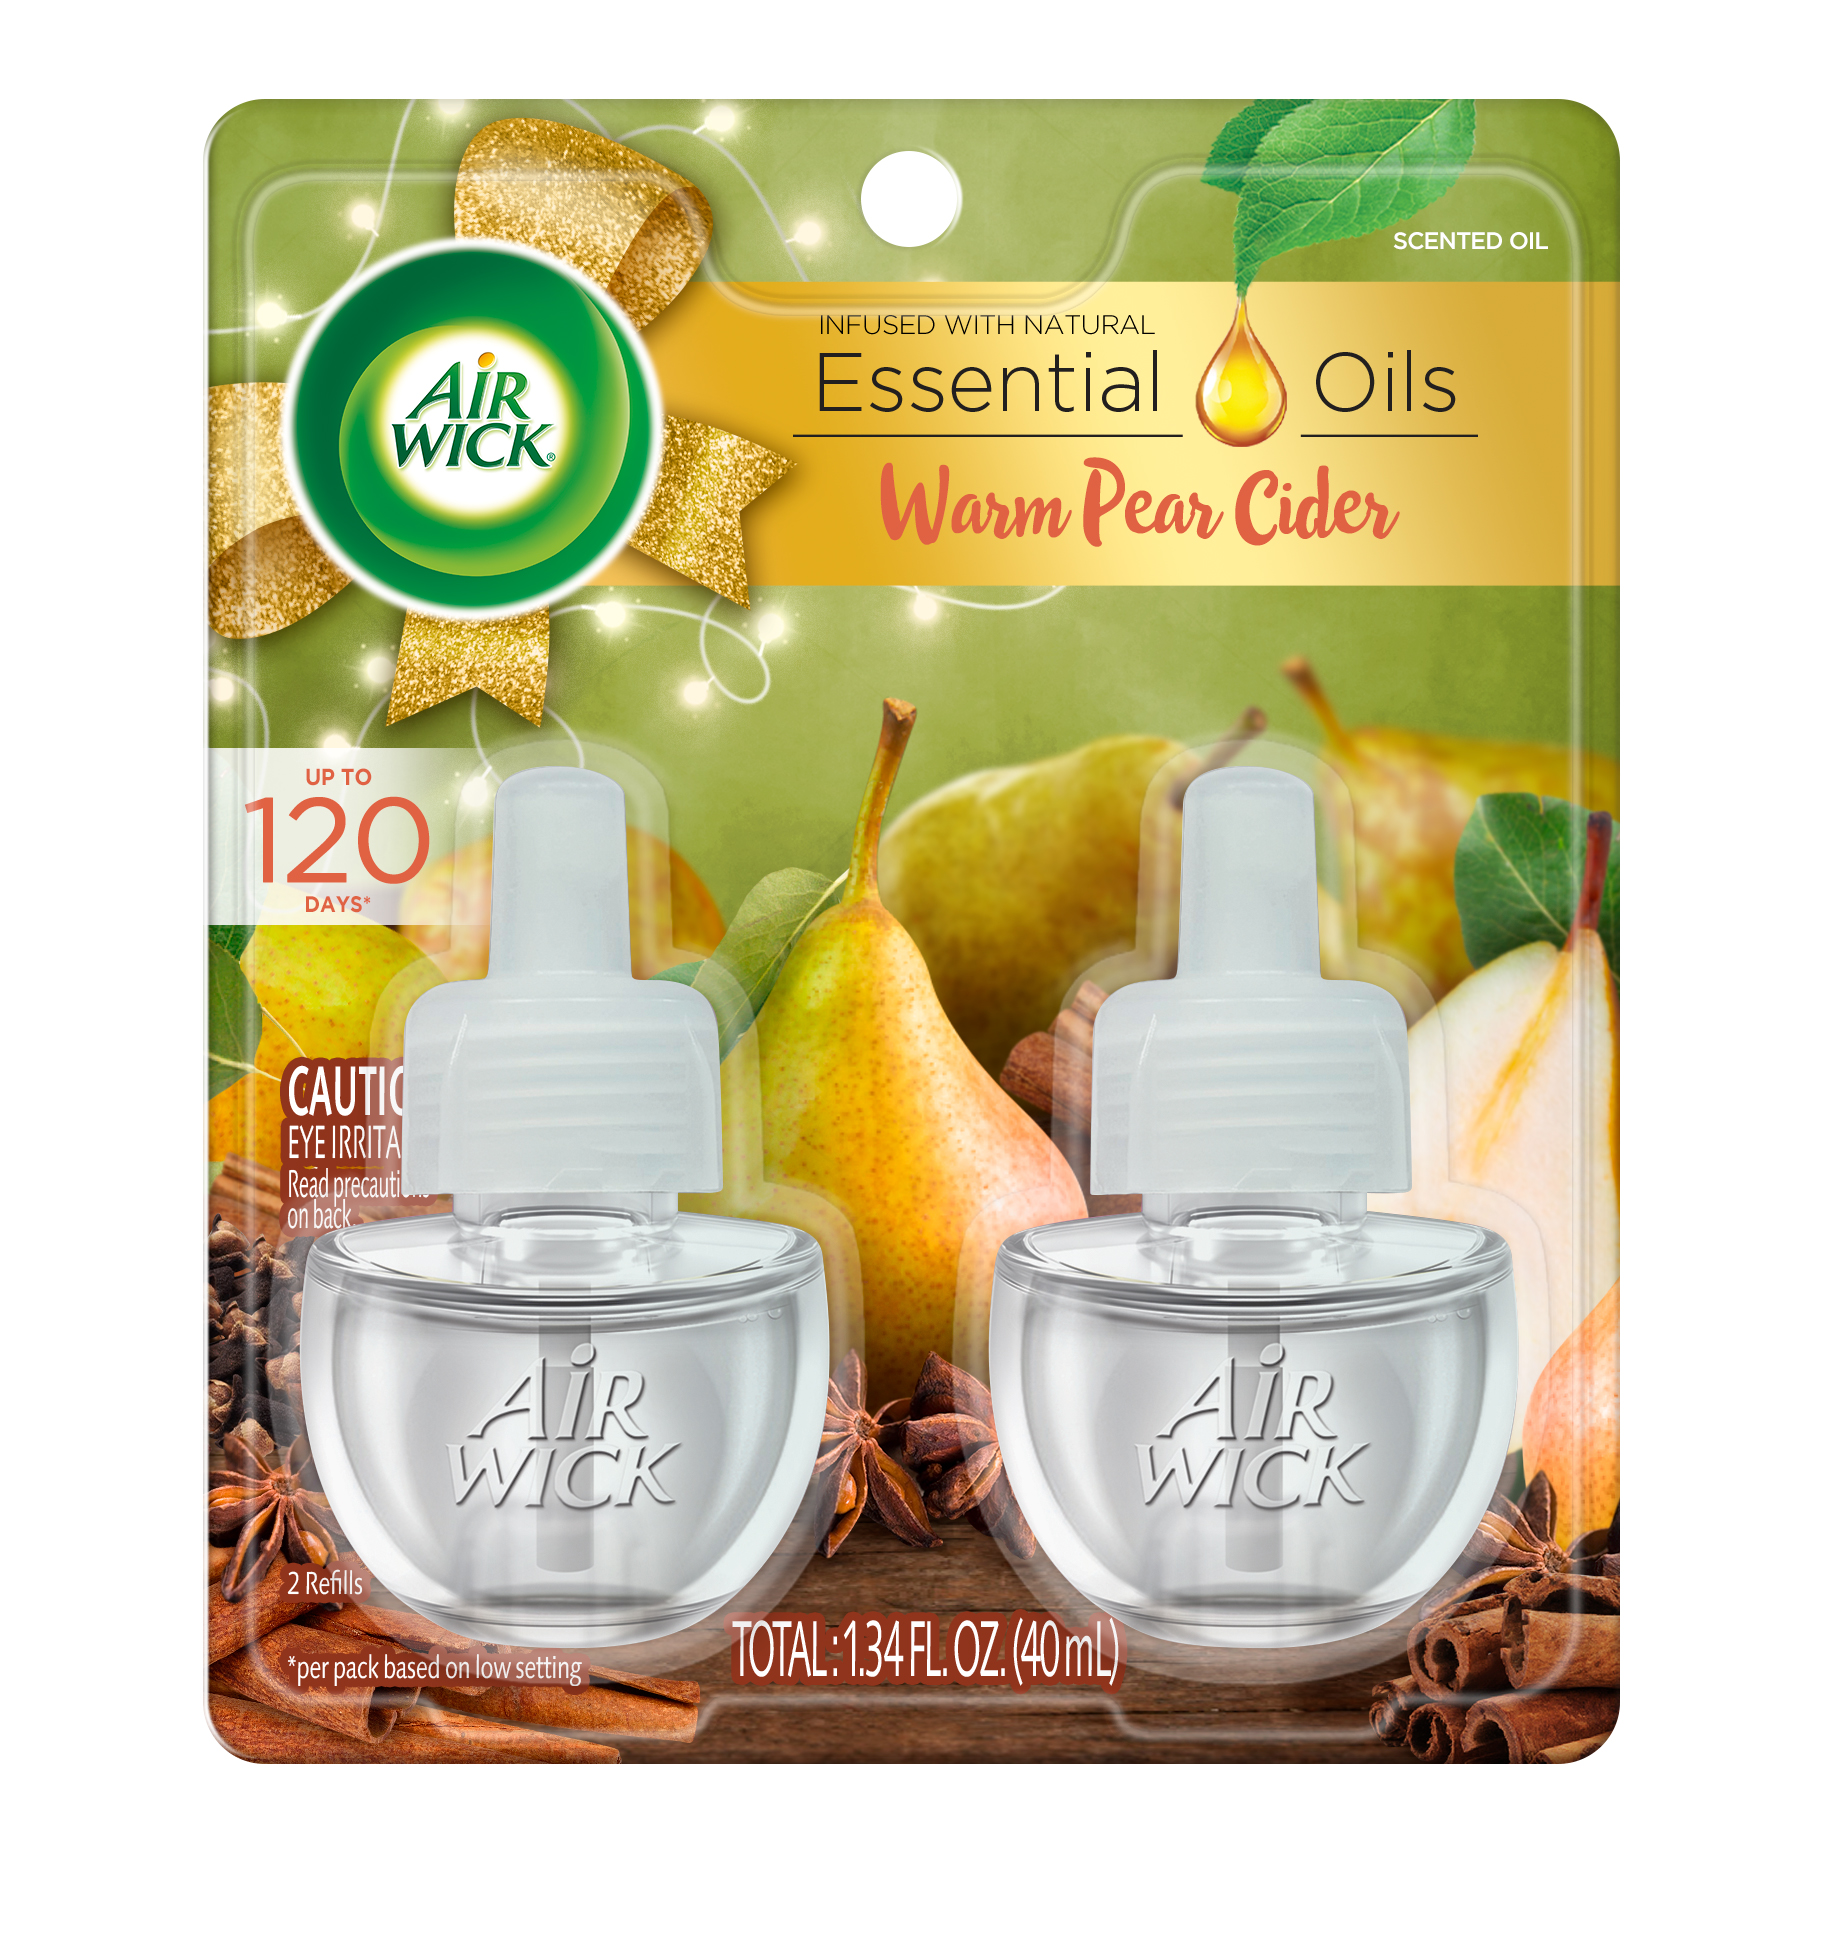 AIR WICK Scented Oil  Warm Pear Cider Discontinued